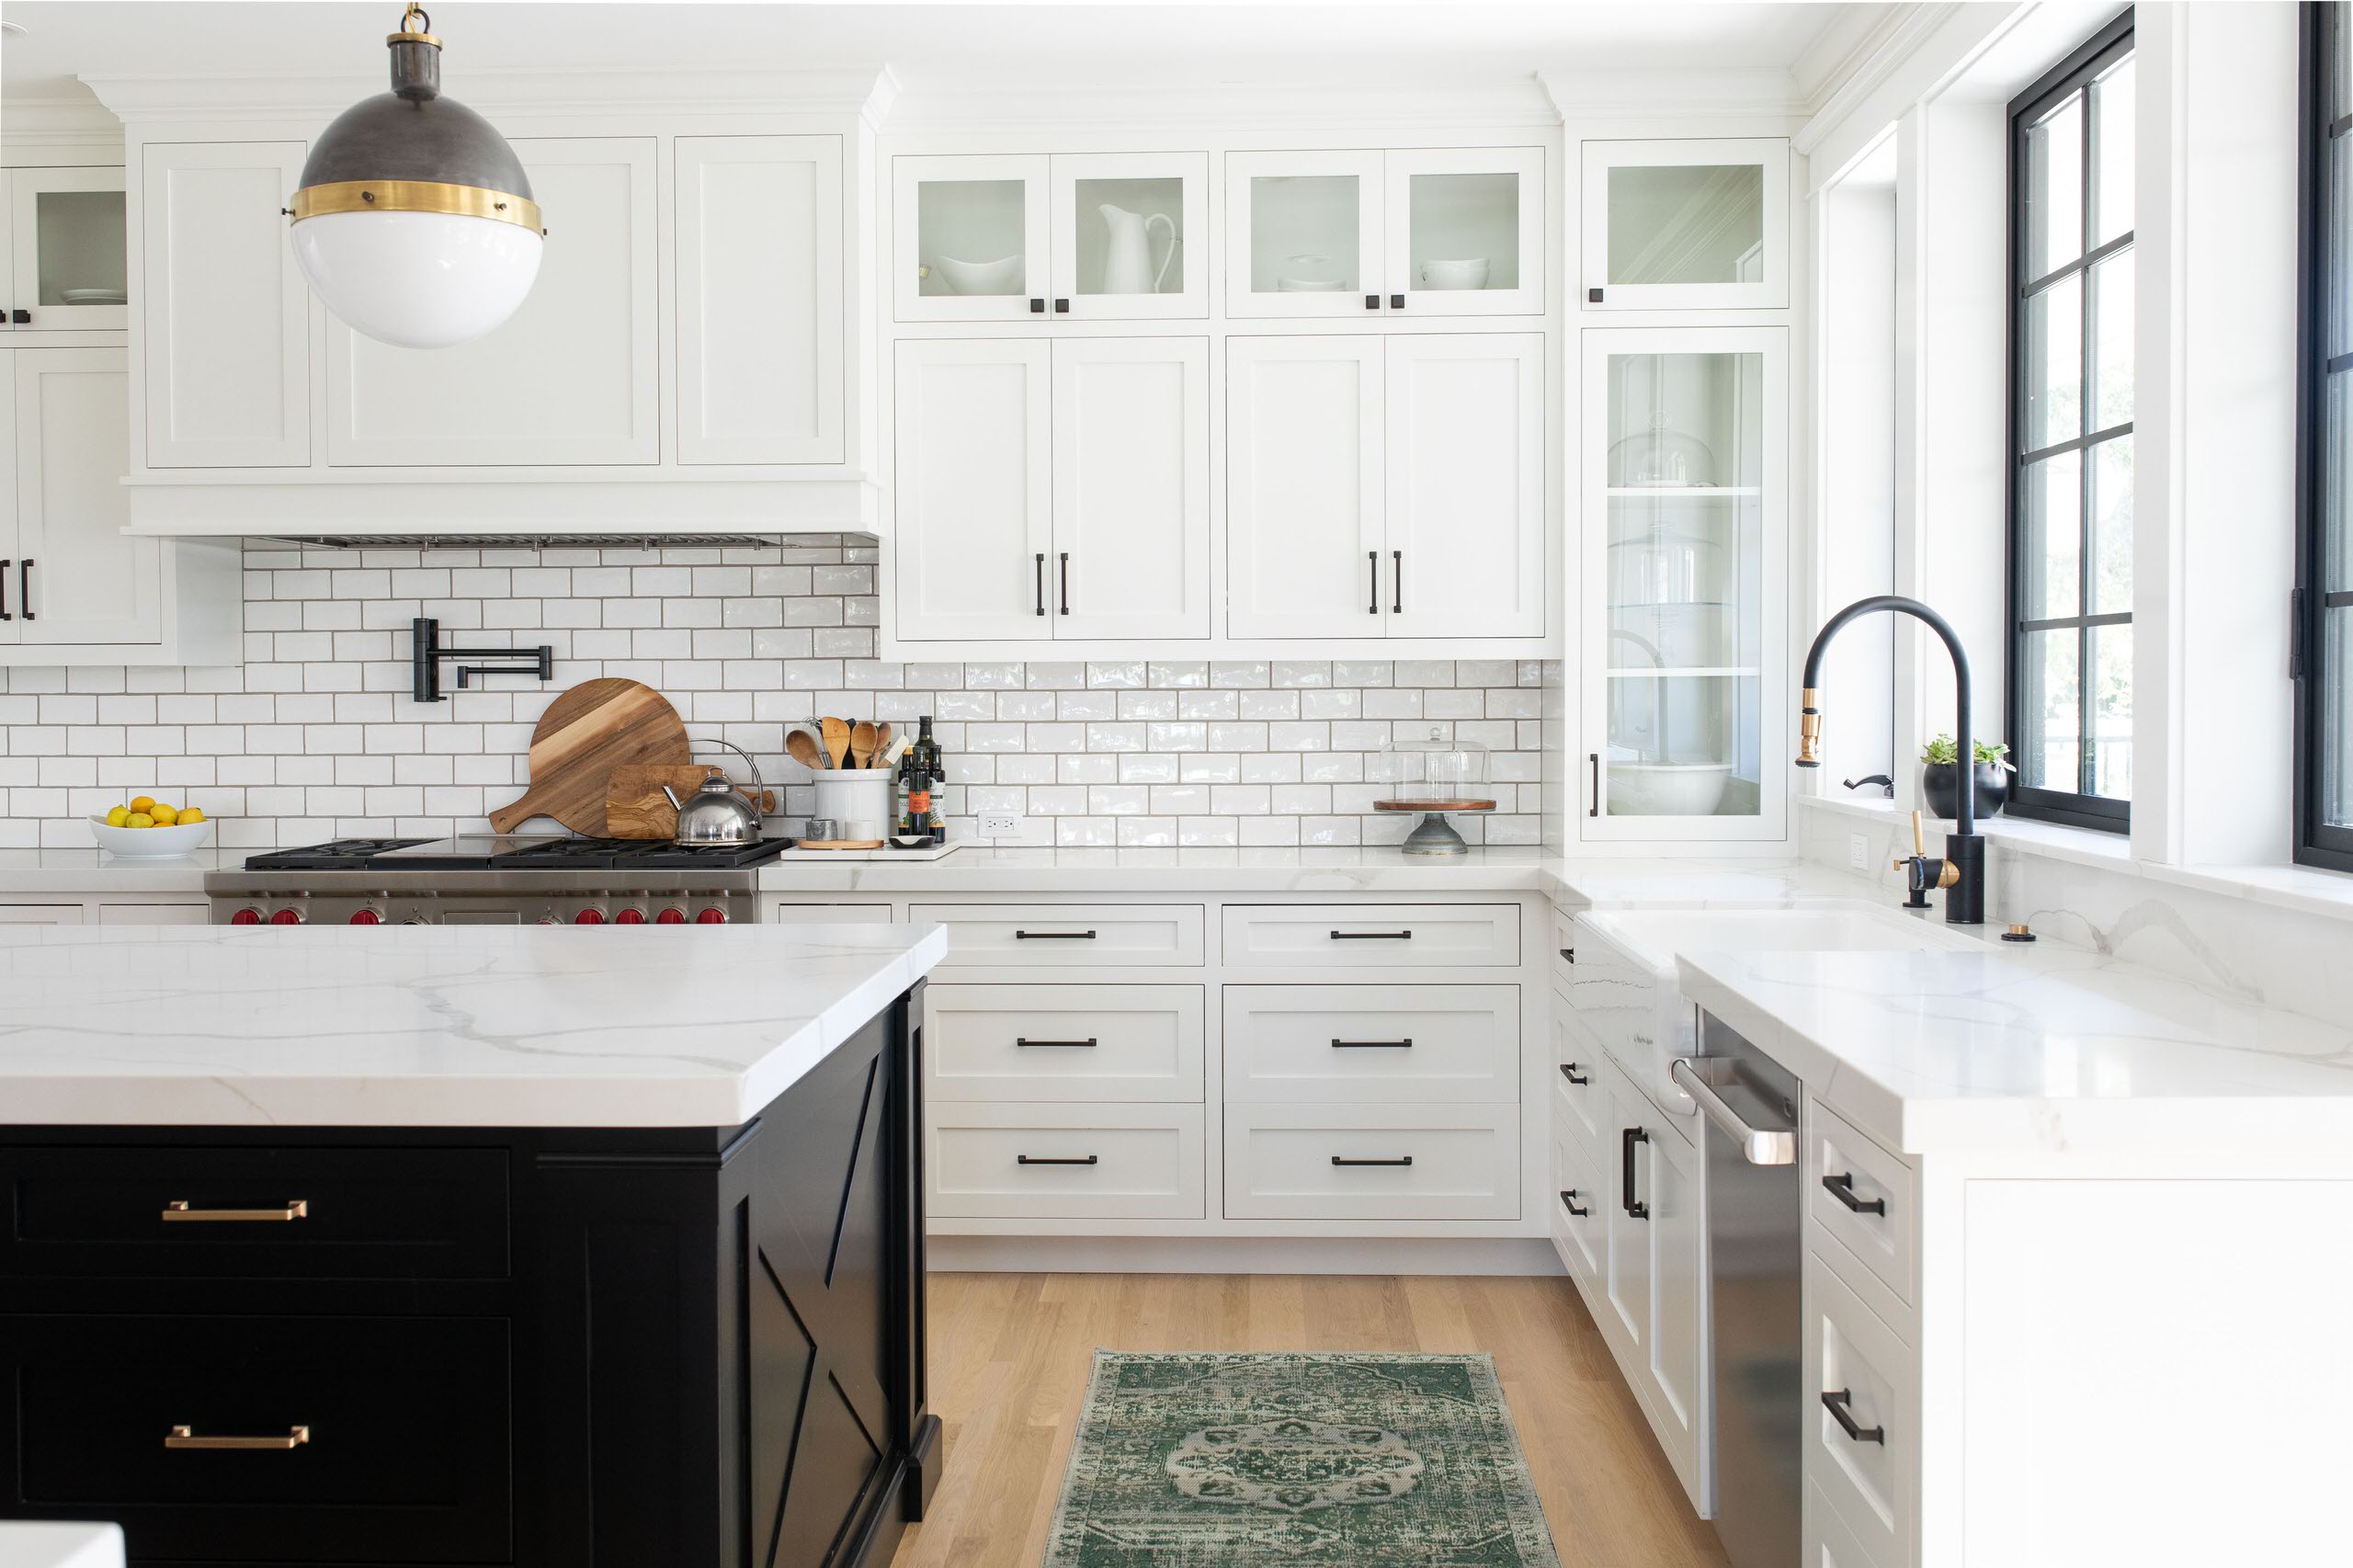 White Cabinets And Quartz Countertops, What Color Quartz Countertops Go With White Cabinets